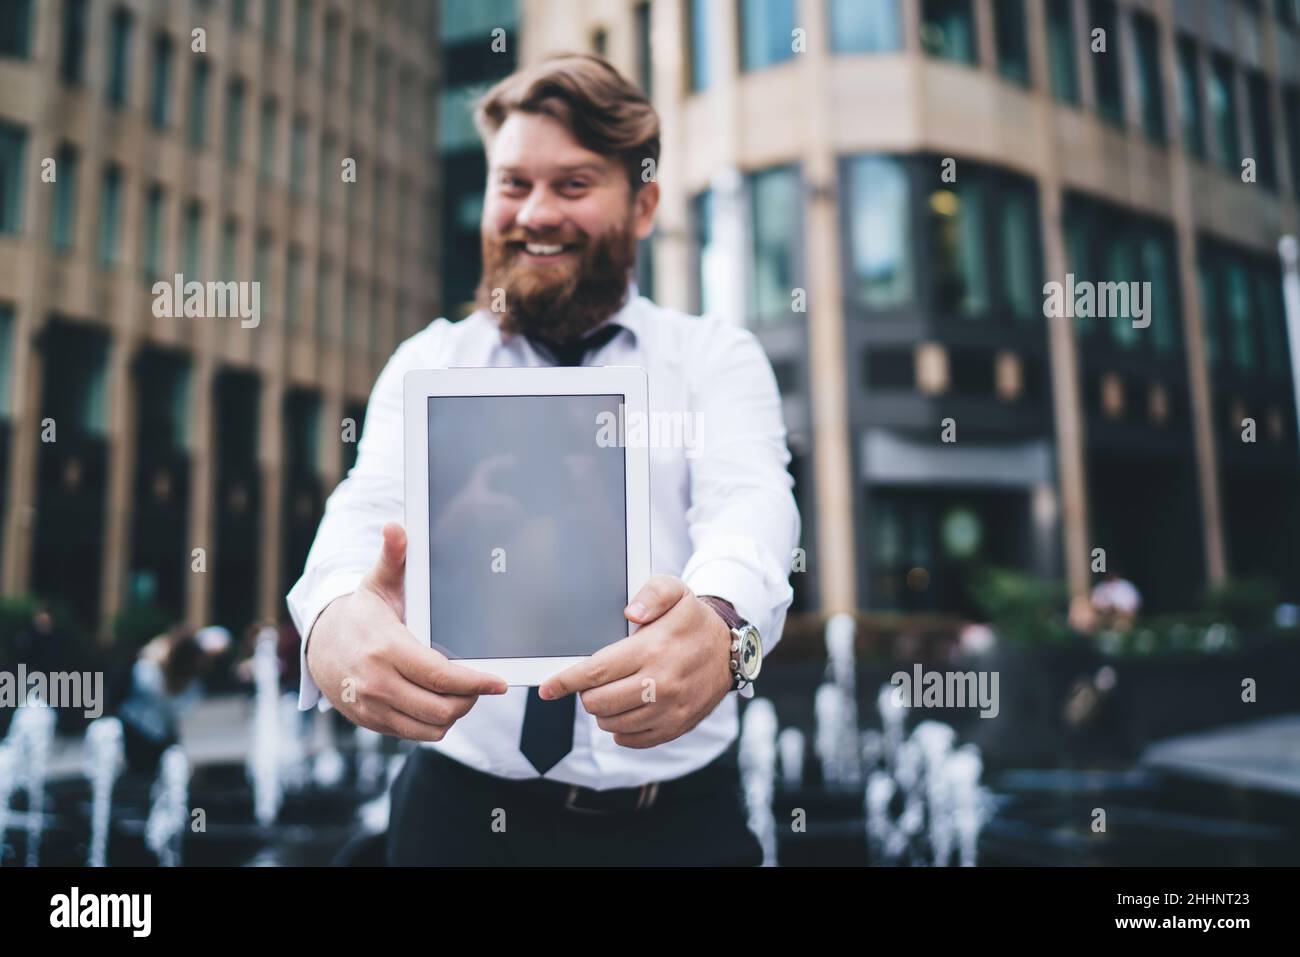 Happy businessman showing tablet screen on street Stock Photo